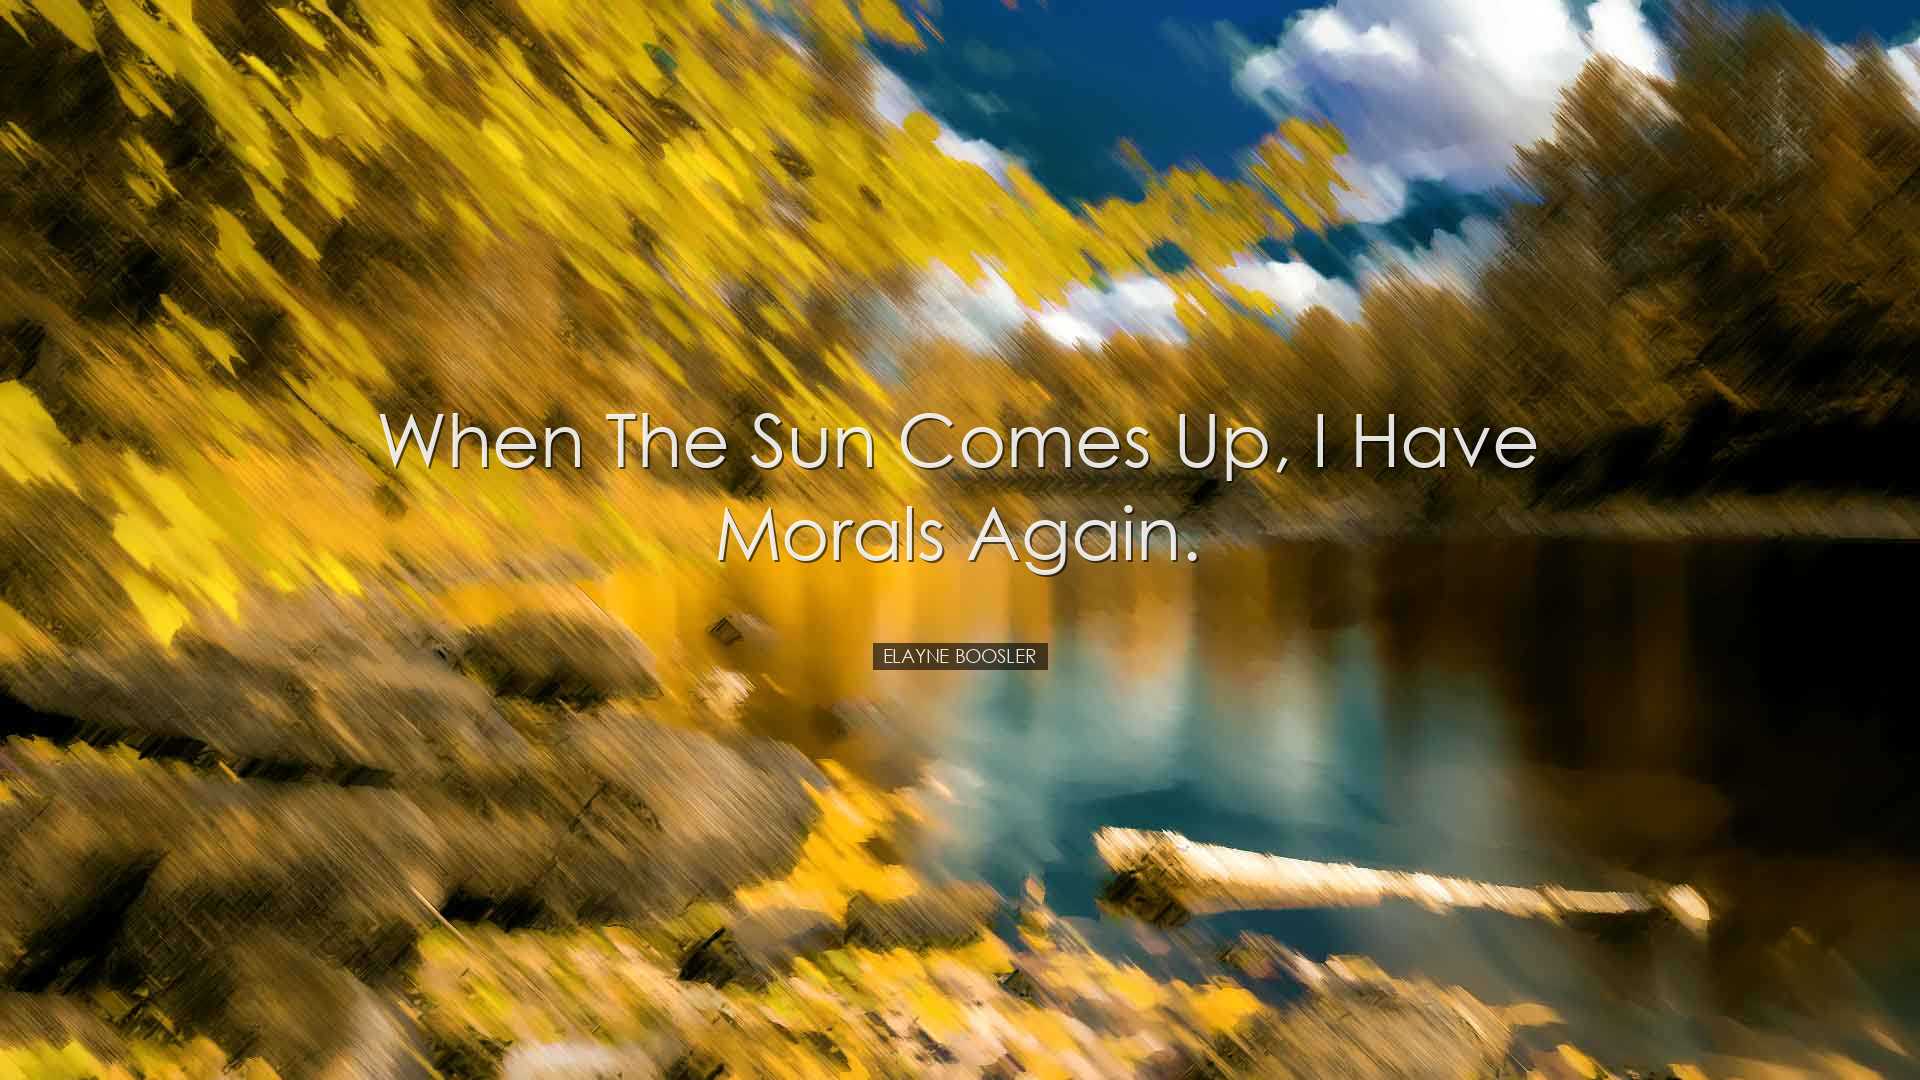 When the sun comes up, I have morals again. - Elayne Boosler